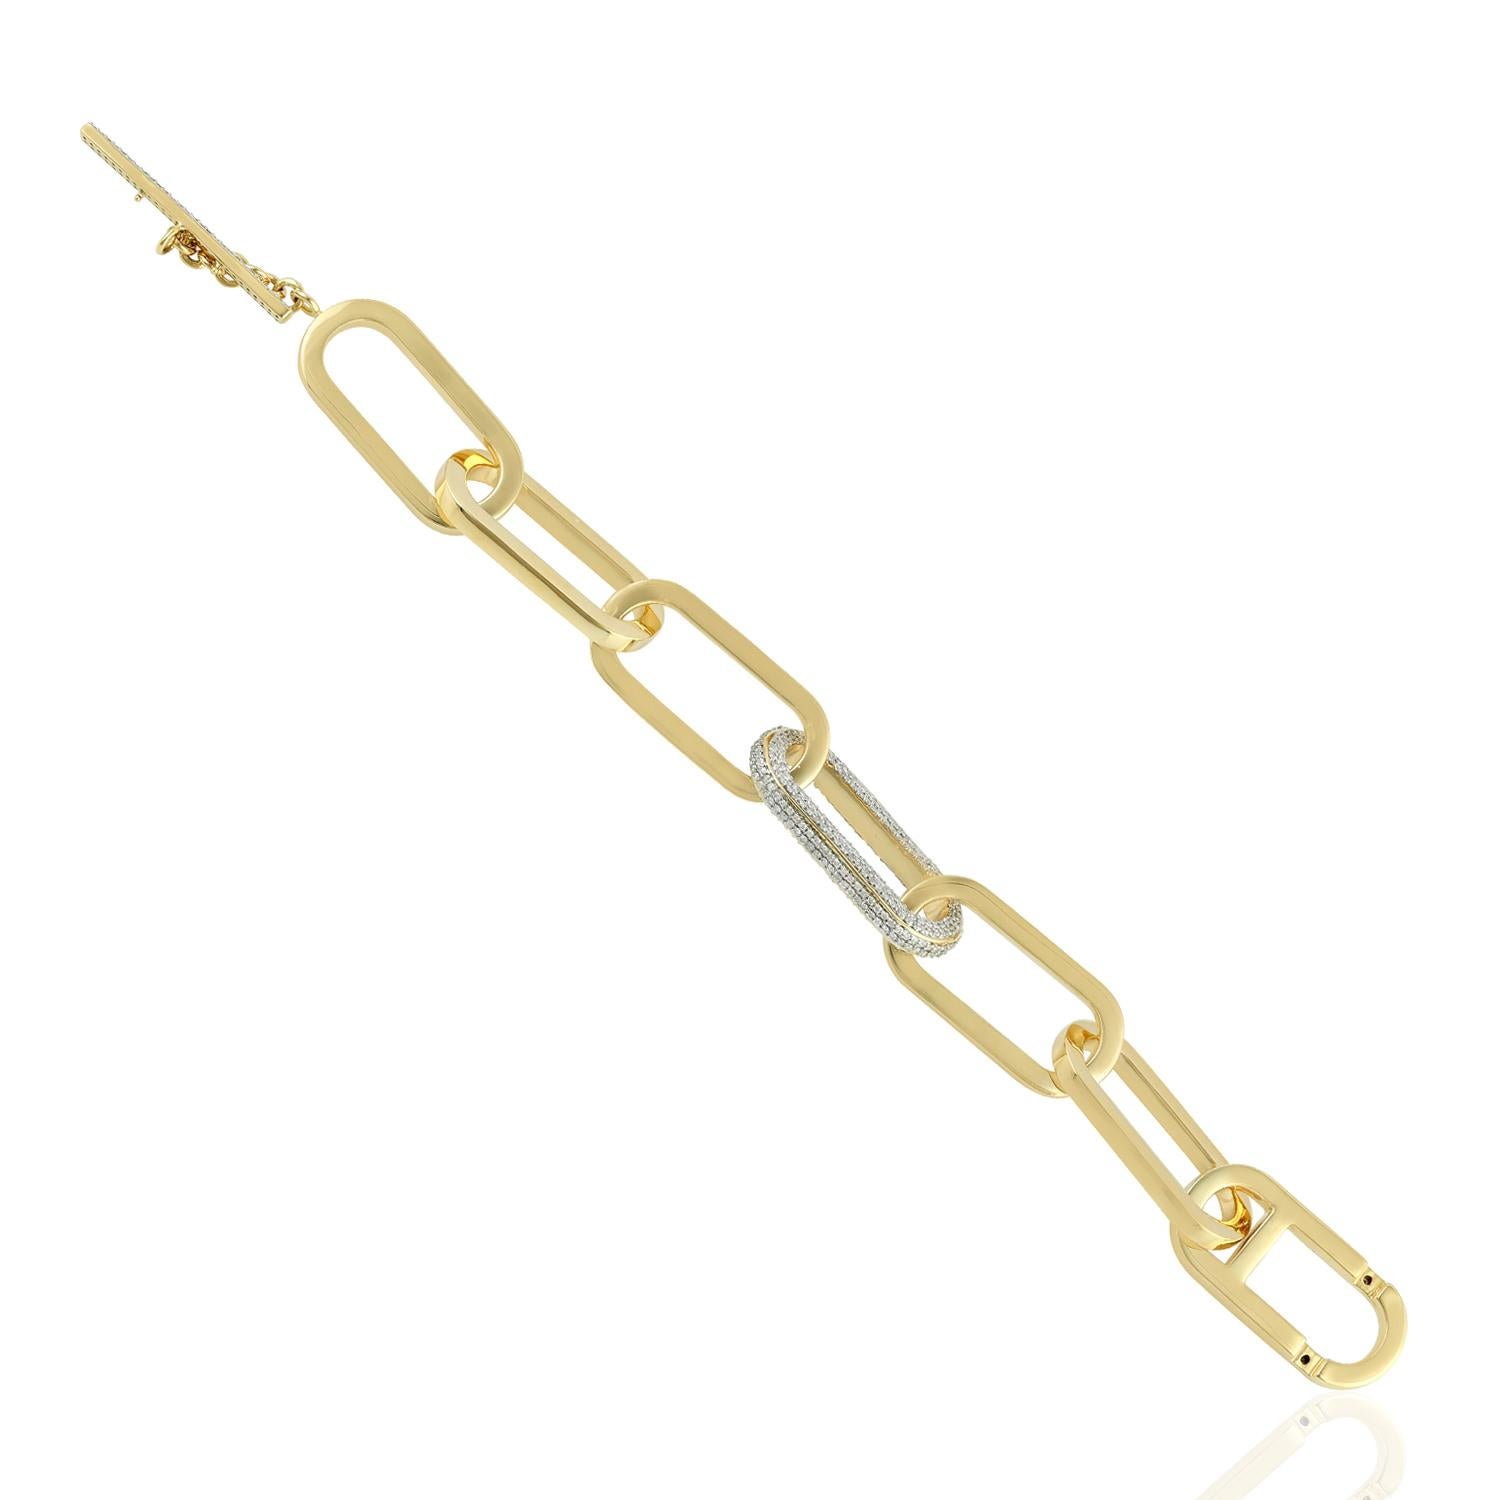 Cast from 18-karat yellow gold, this link bracelet is hand set with 1.99 carats of sparkling diamonds. 

FOLLOW  MEGHNA JEWELS storefront to view the latest collection & exclusive pieces.  Meghna Jewels is proudly rated as a Top Seller on 1stdibs